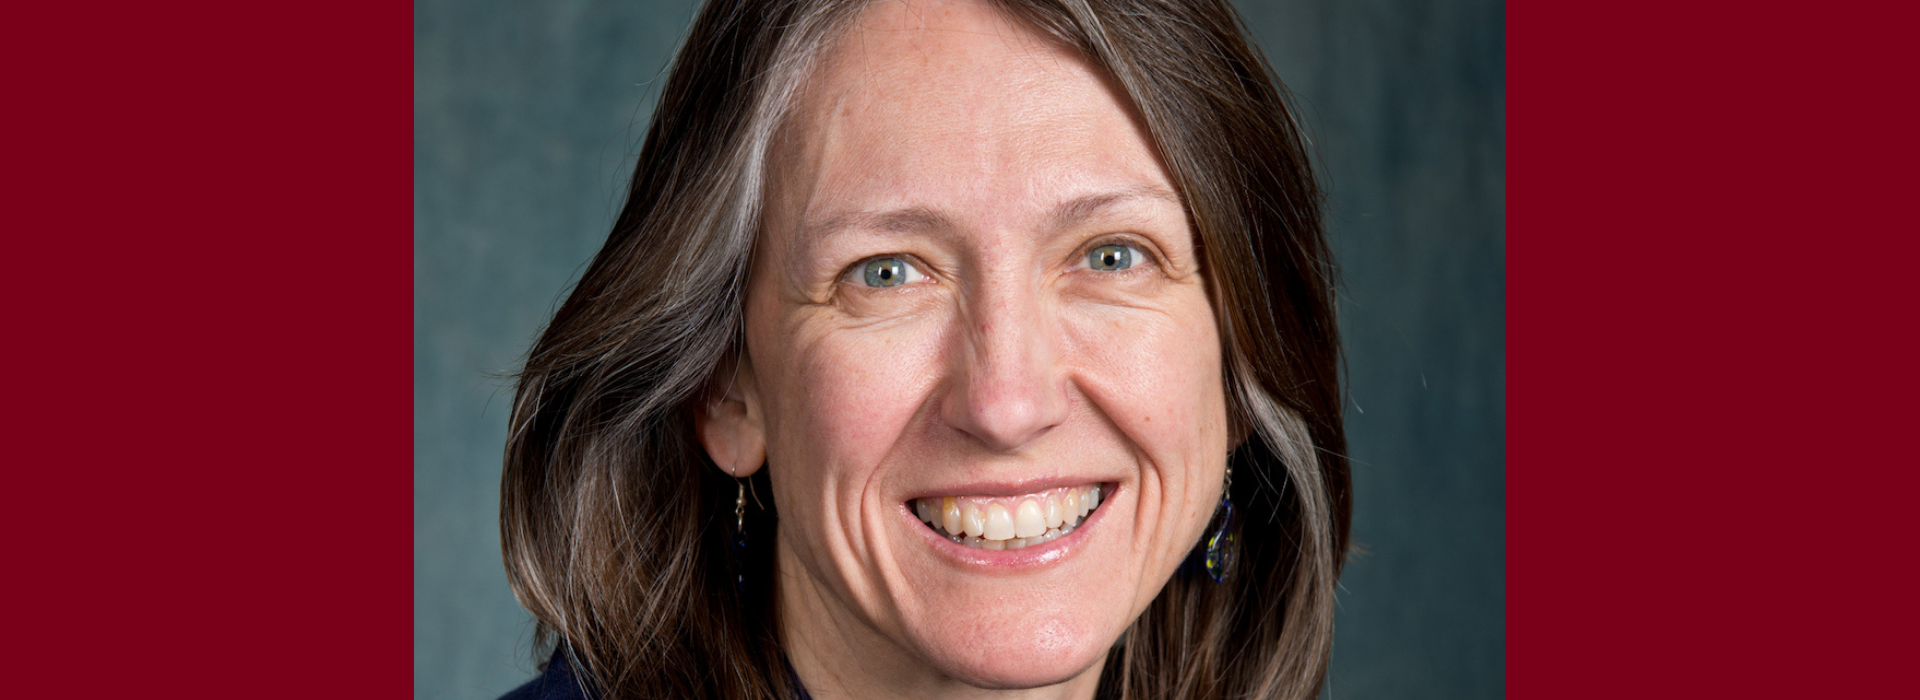 Catherine A. McCarty, PhD, MPH, MSB, HEC-C, professor and associate dean for research has been selected as the 2021-2022 Building Research Capacity (BRC) Program Fellow – a joint effort of North American Primary Care Research Group (NAPCRG) and the Associ